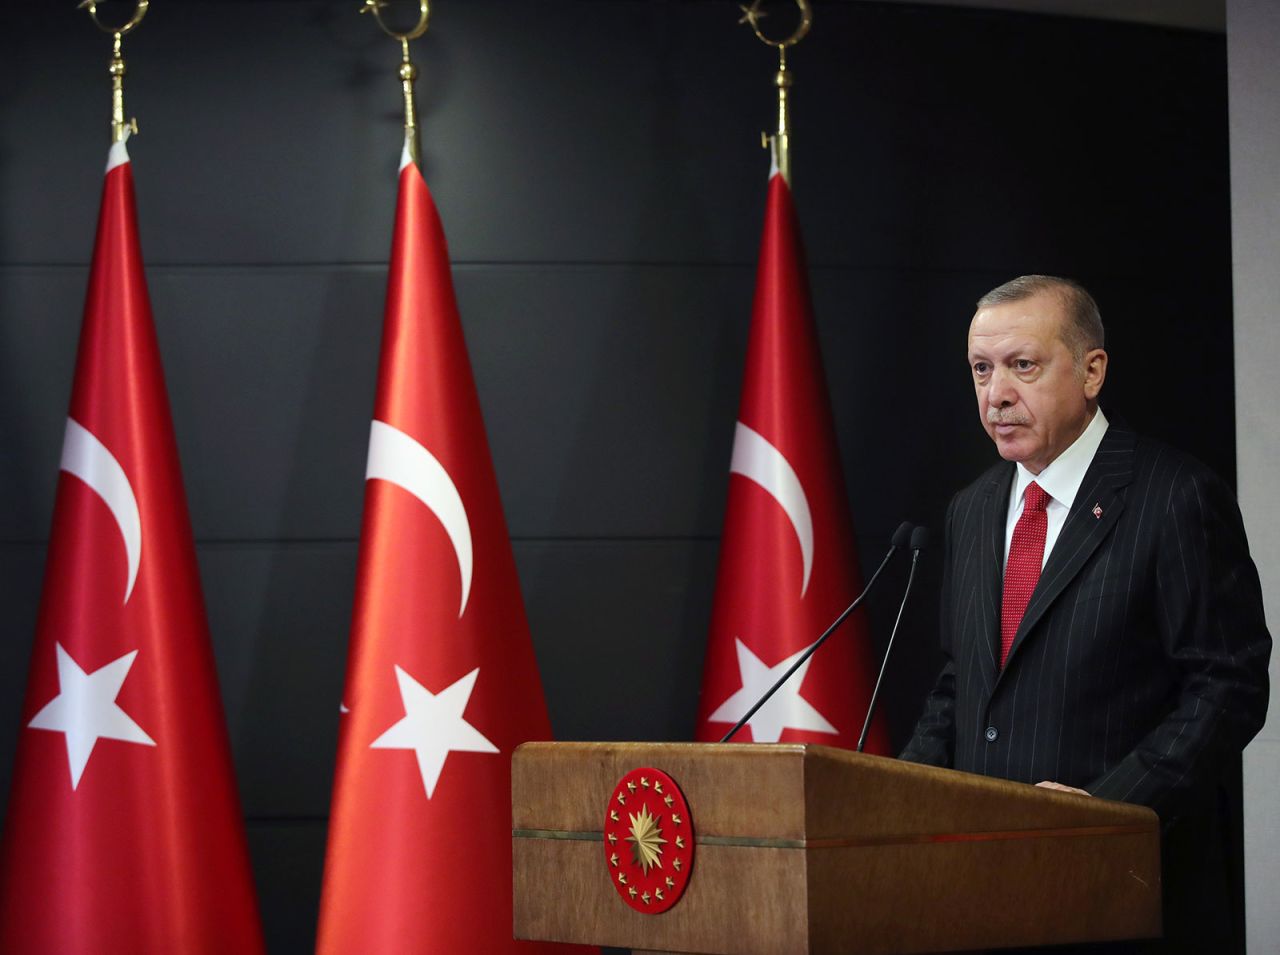 Turkish President Recep Tayyip Erdogan speaks during a press conference on April 6 in Istanbul, Turkey.